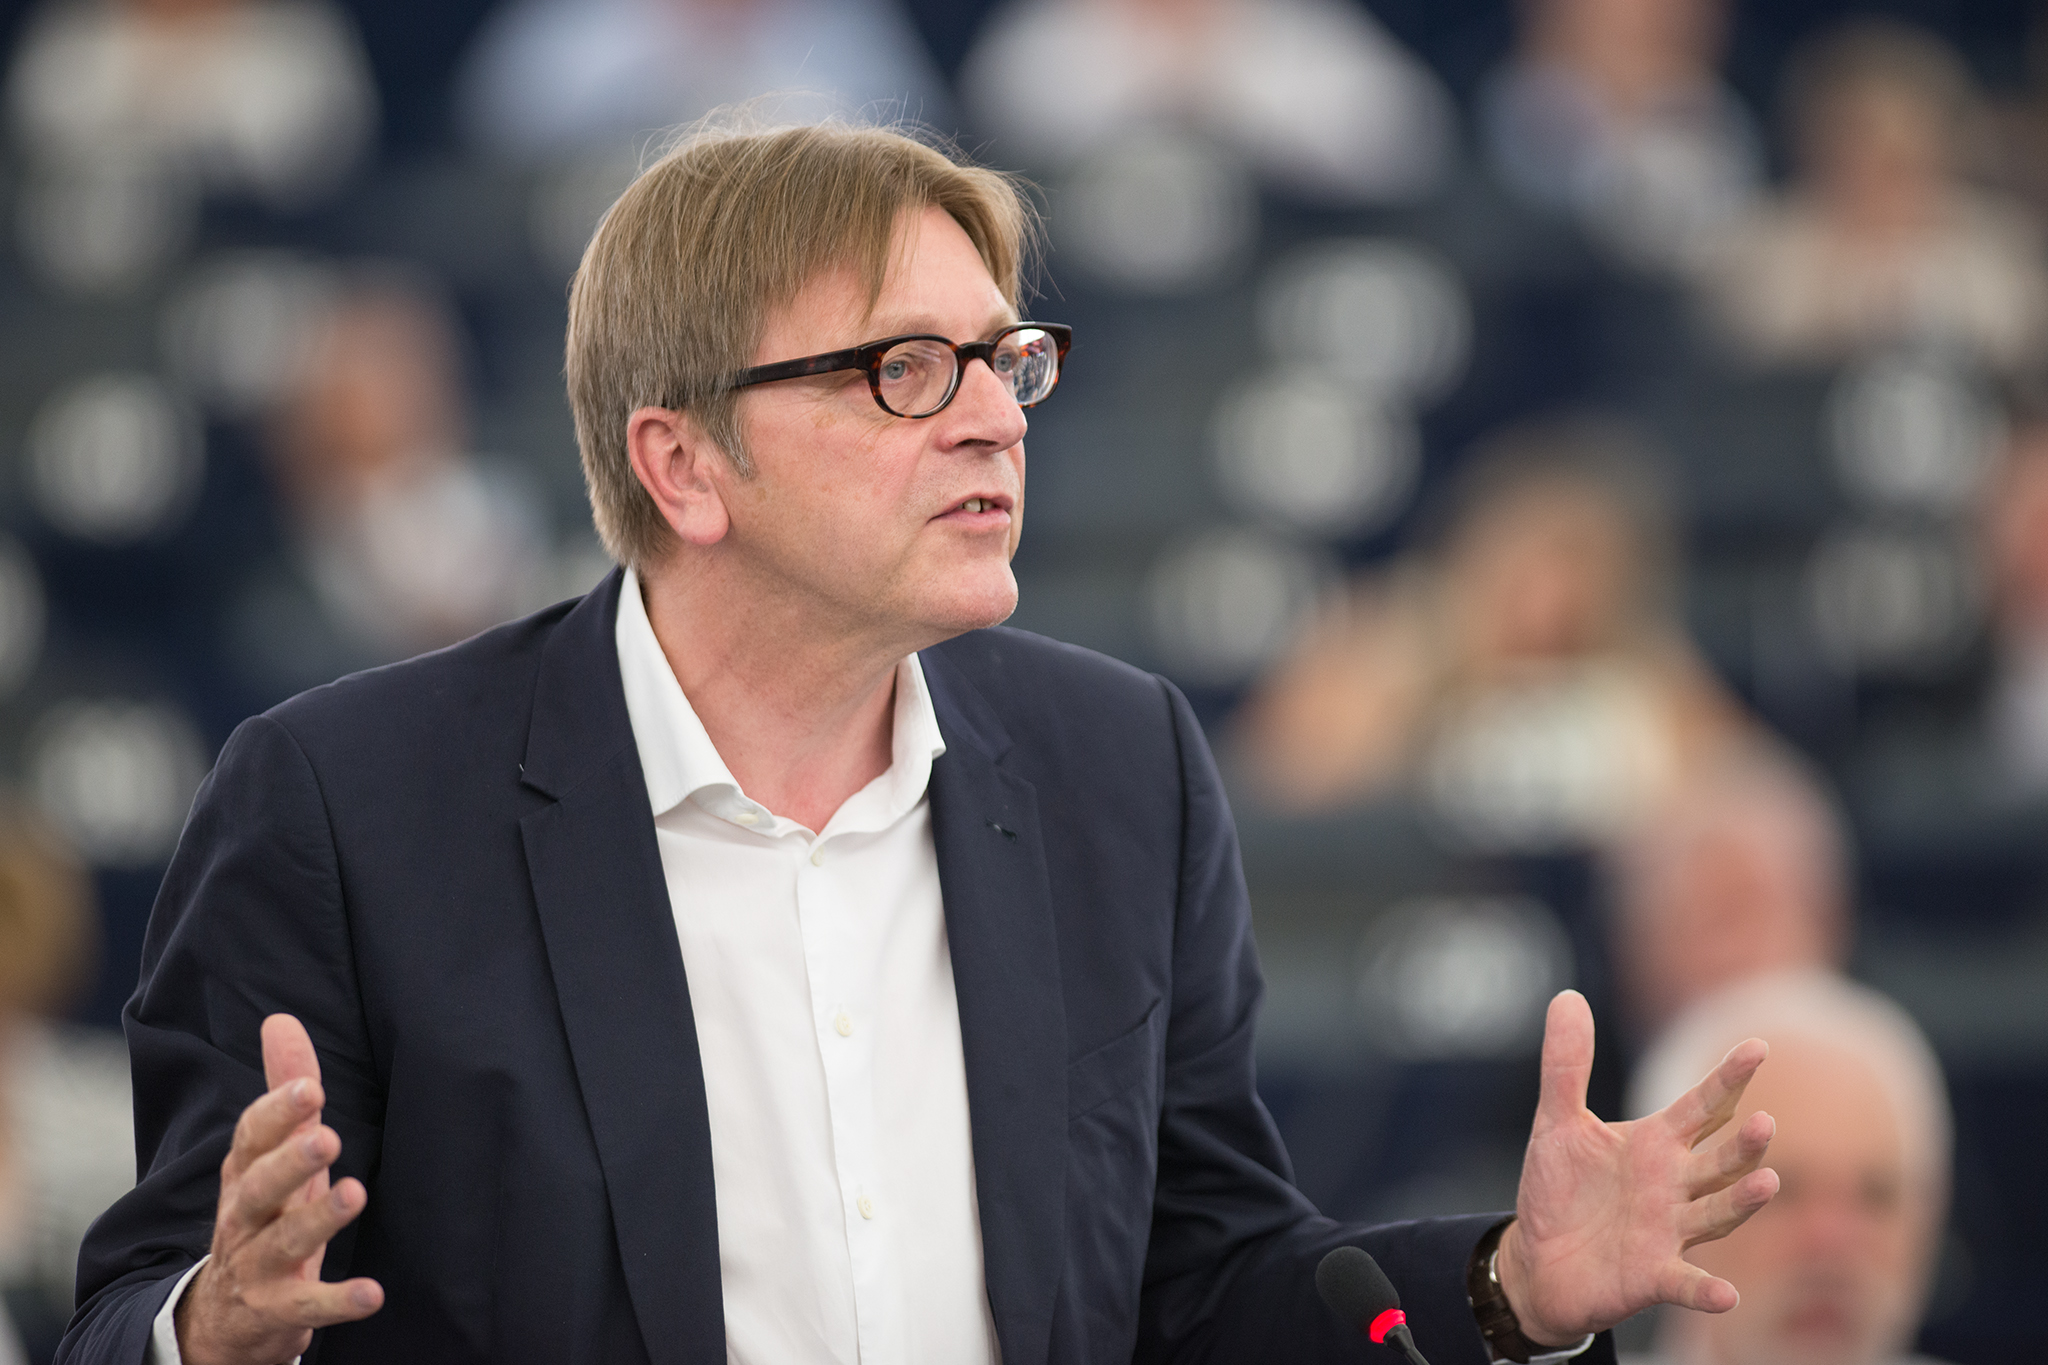 Guy Verhofstadt: “In a world where an algorithm determines all outcomes, politics no longer exits.”